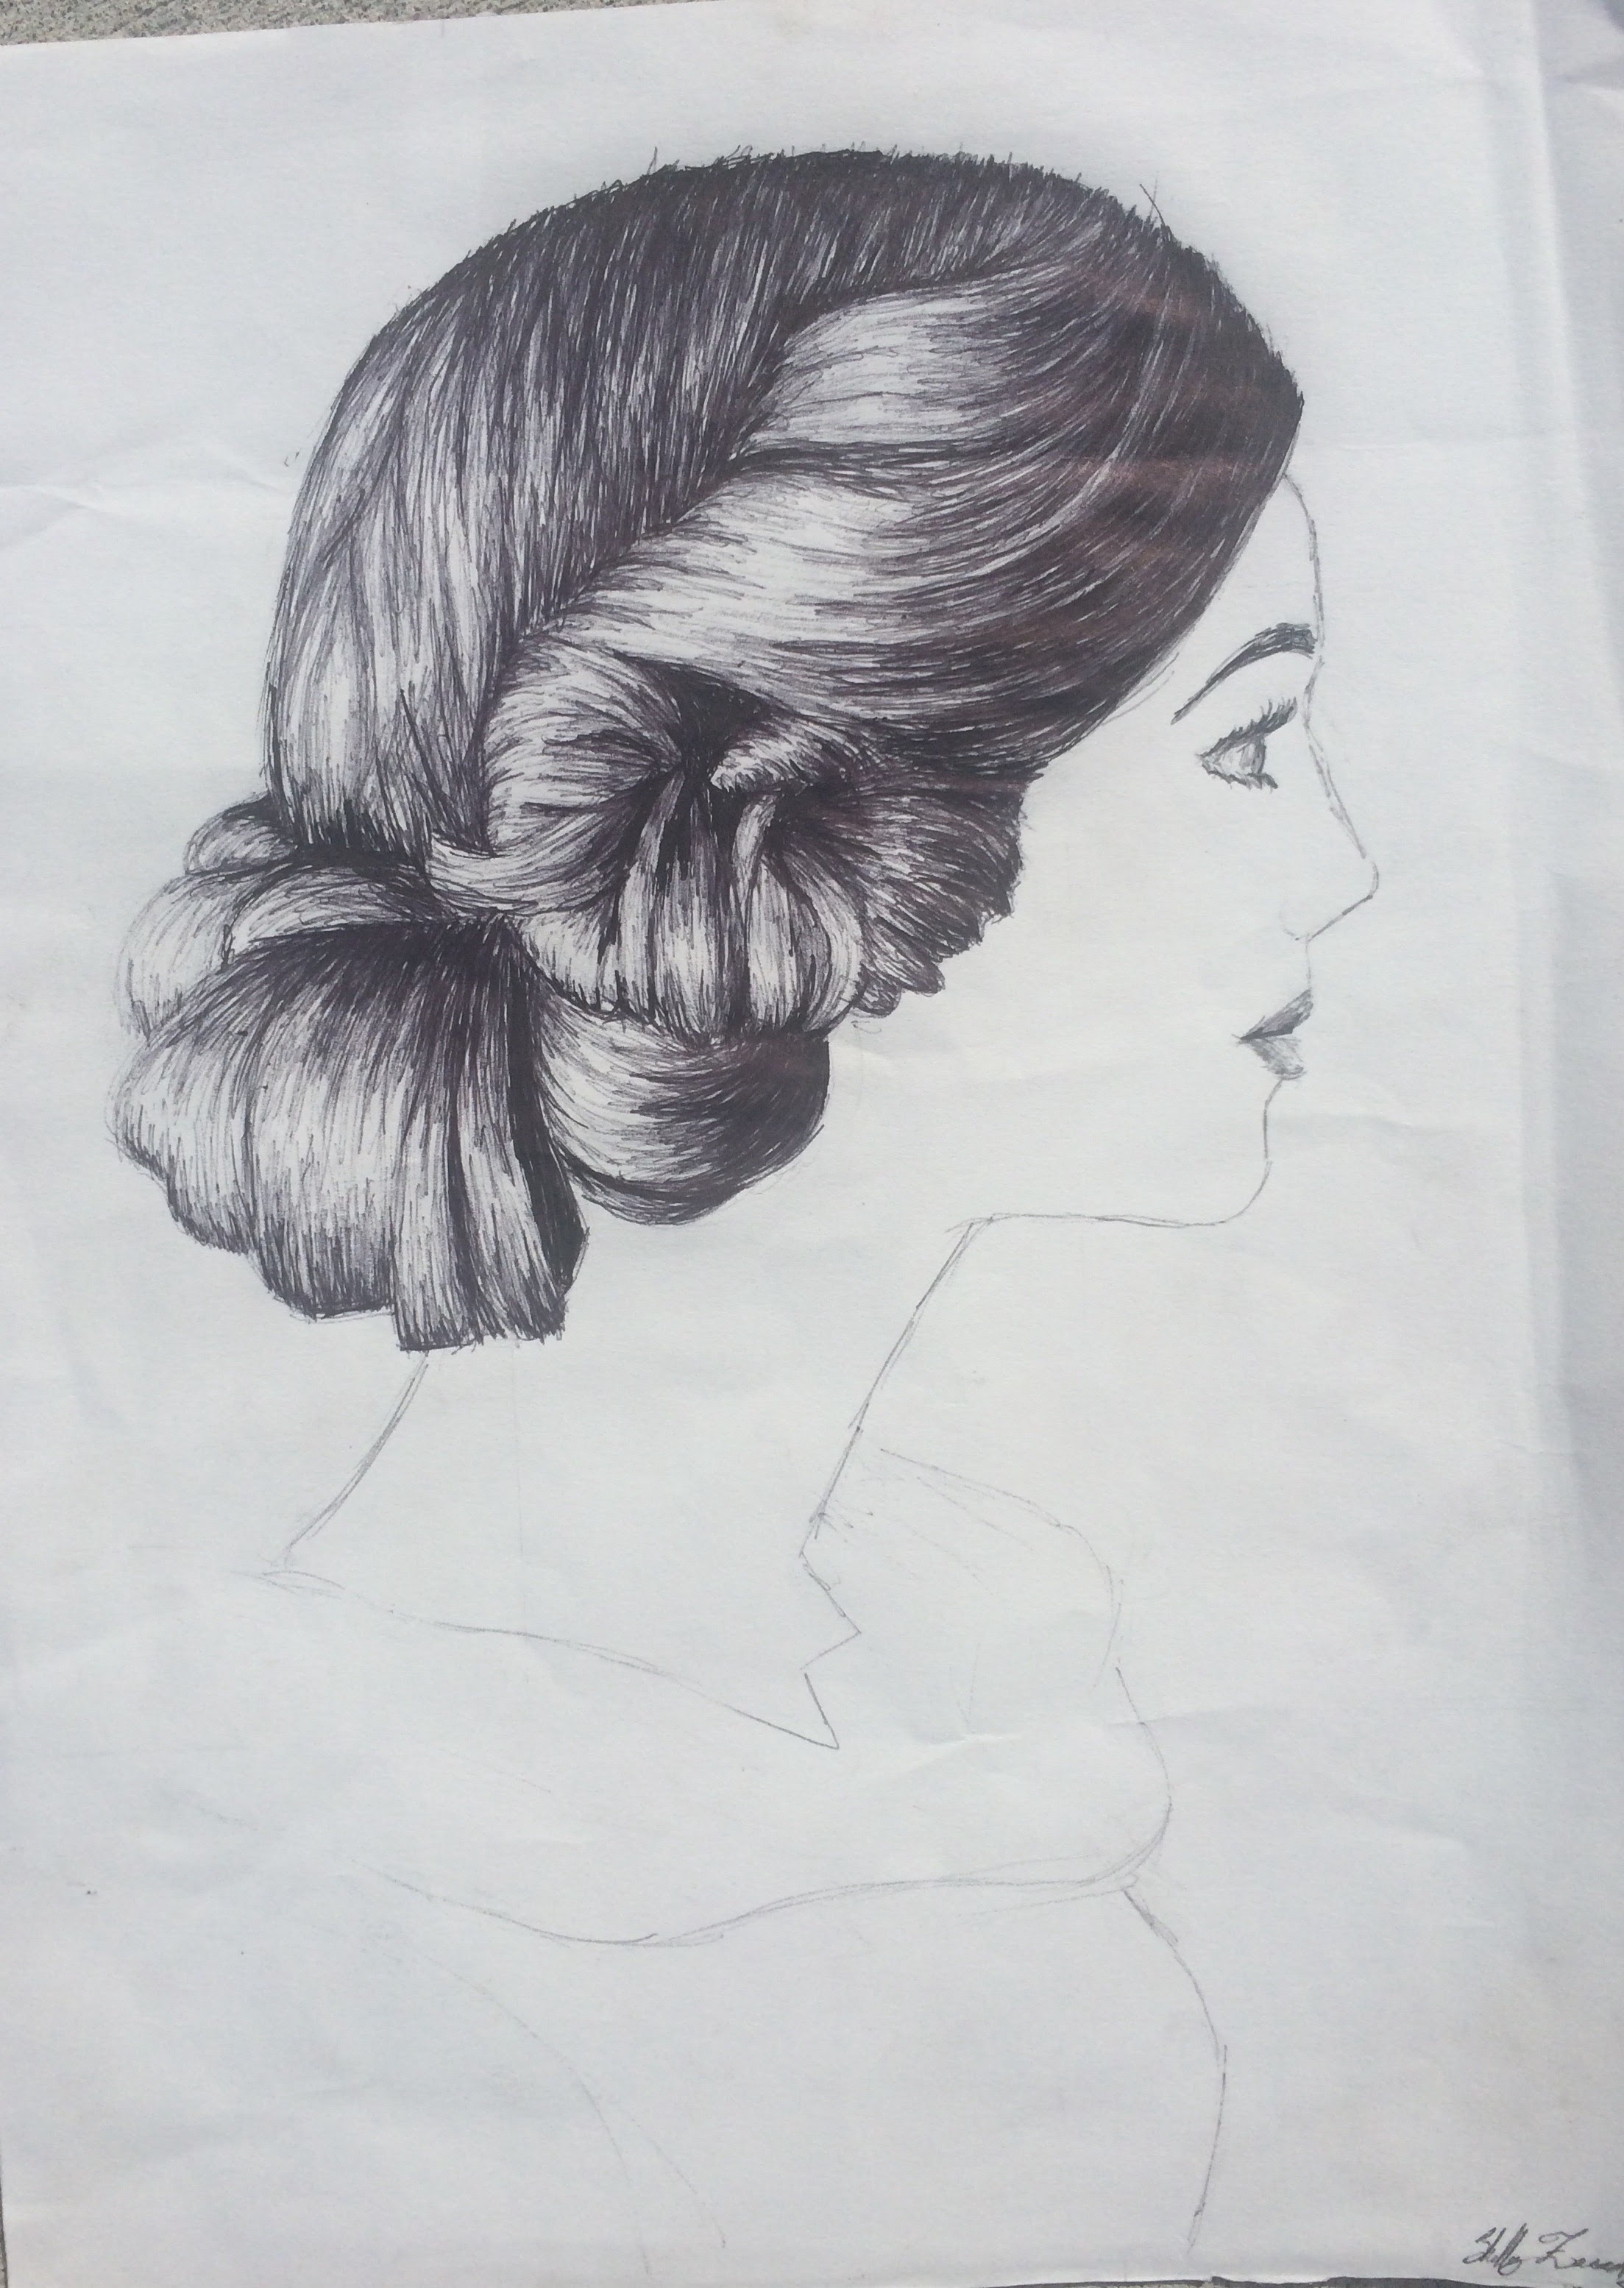 Pen drawing of a complex hairstyle